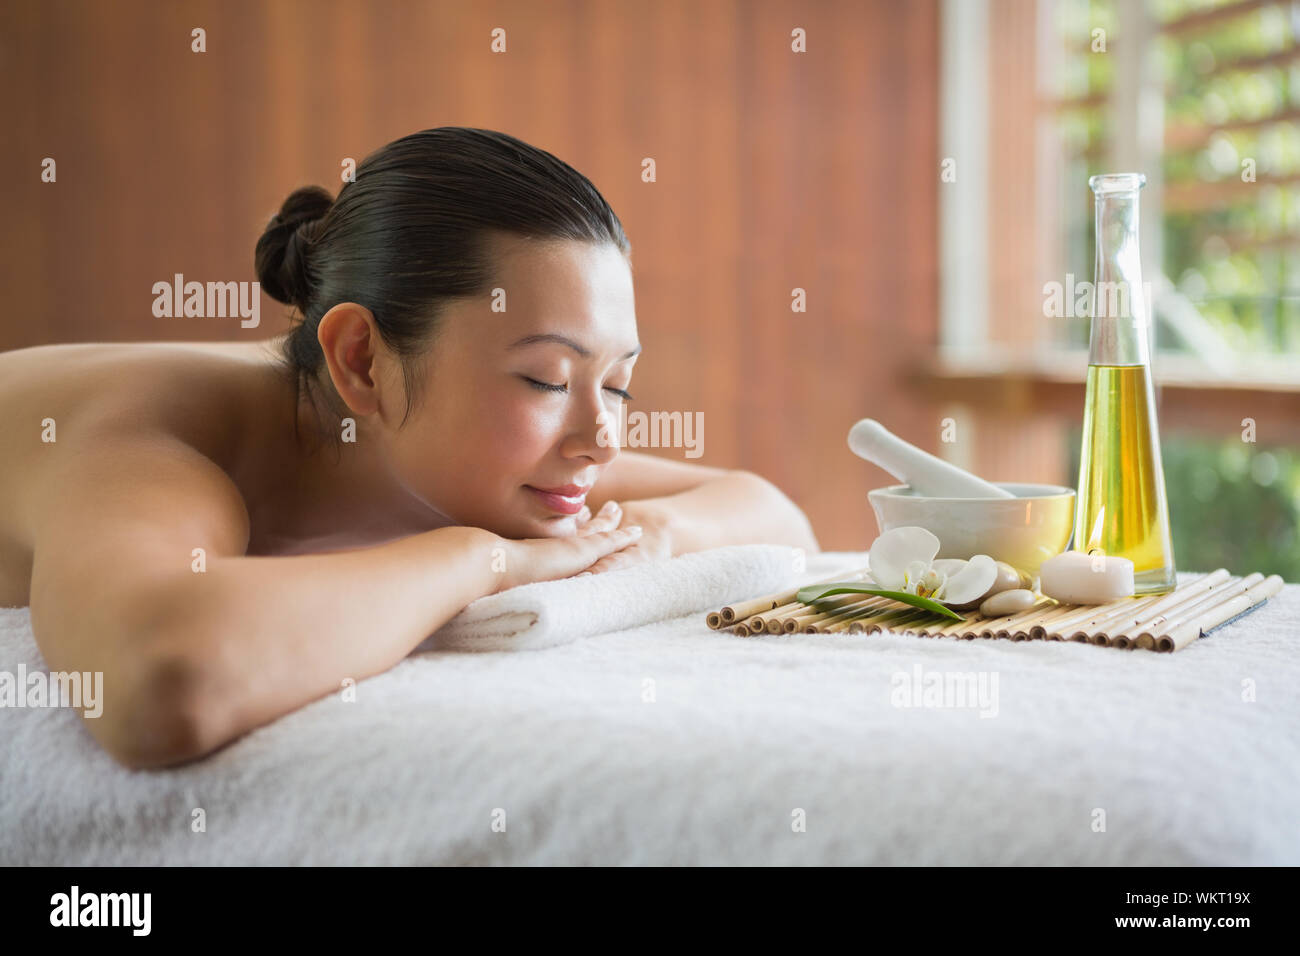 Brunette lying on massage table with tray of beauty treatments at the health spa Stock Photo